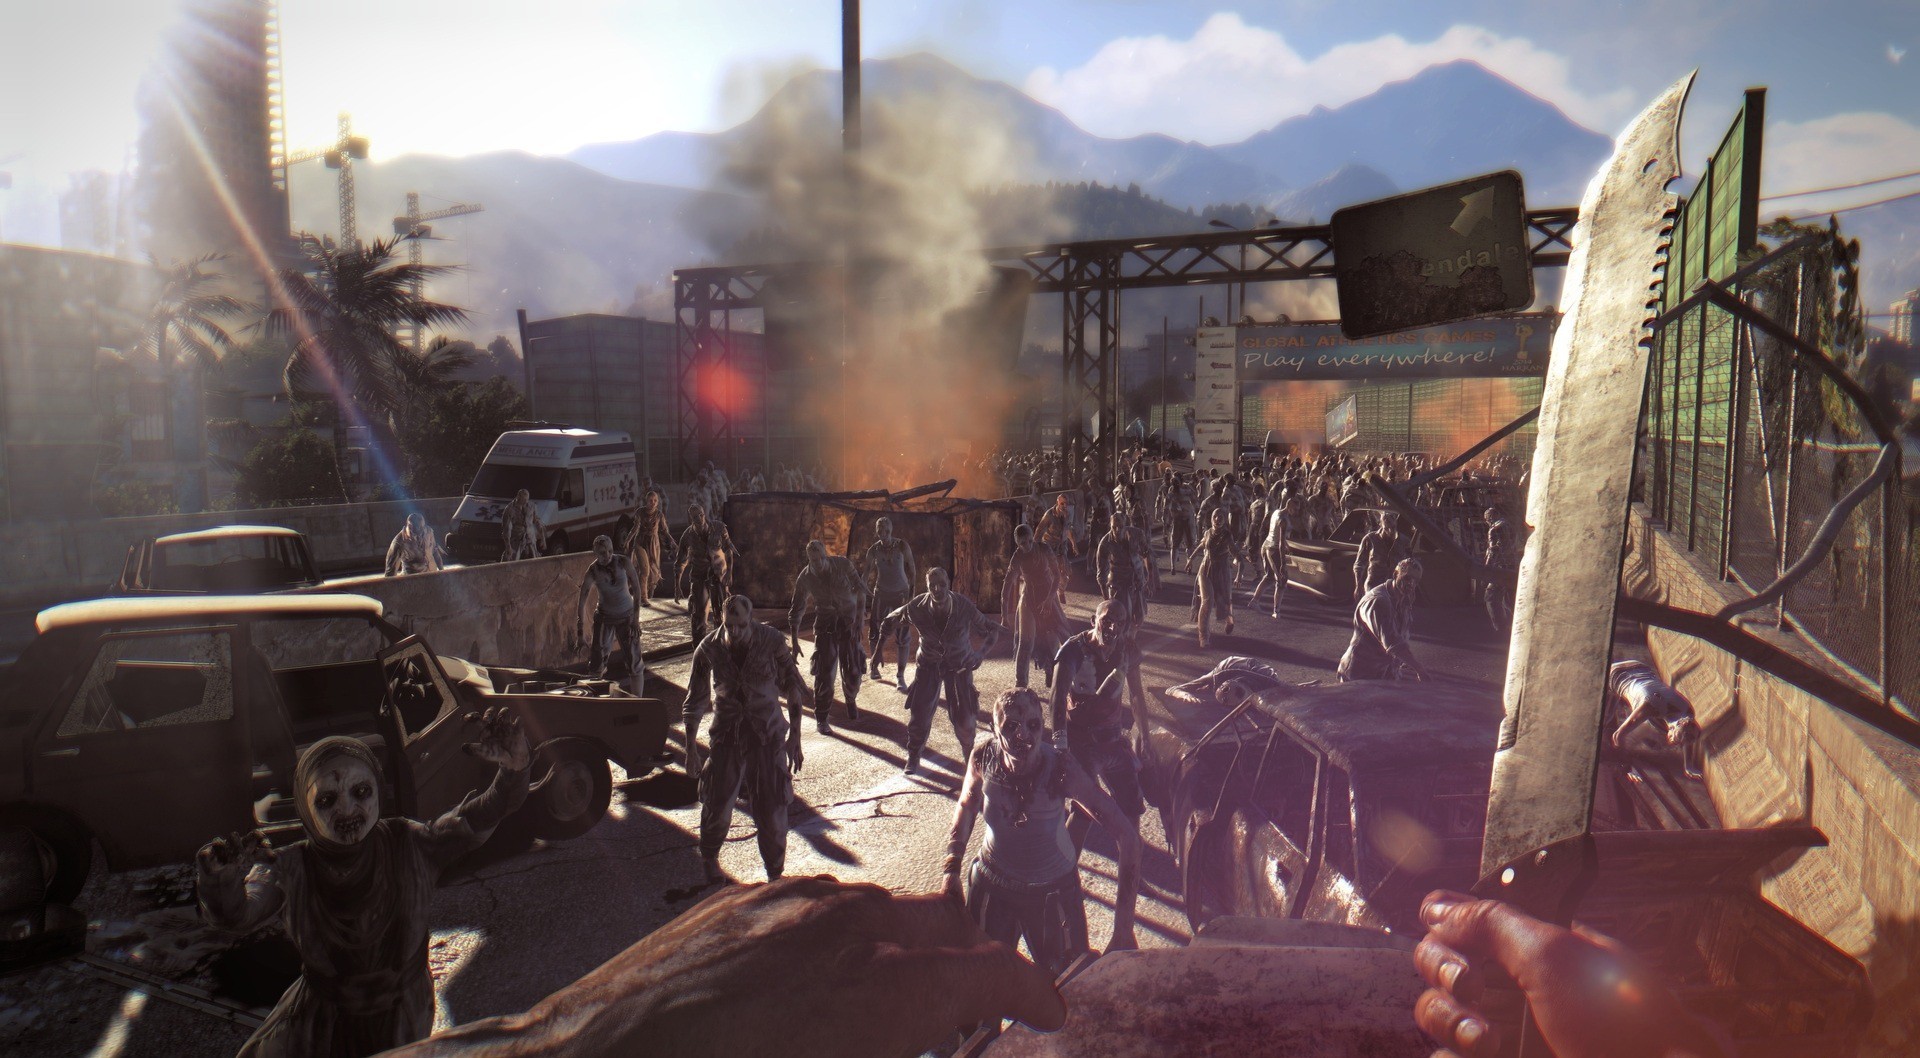 Dying Light PS4 Is 1080p/30fps - GameSpot